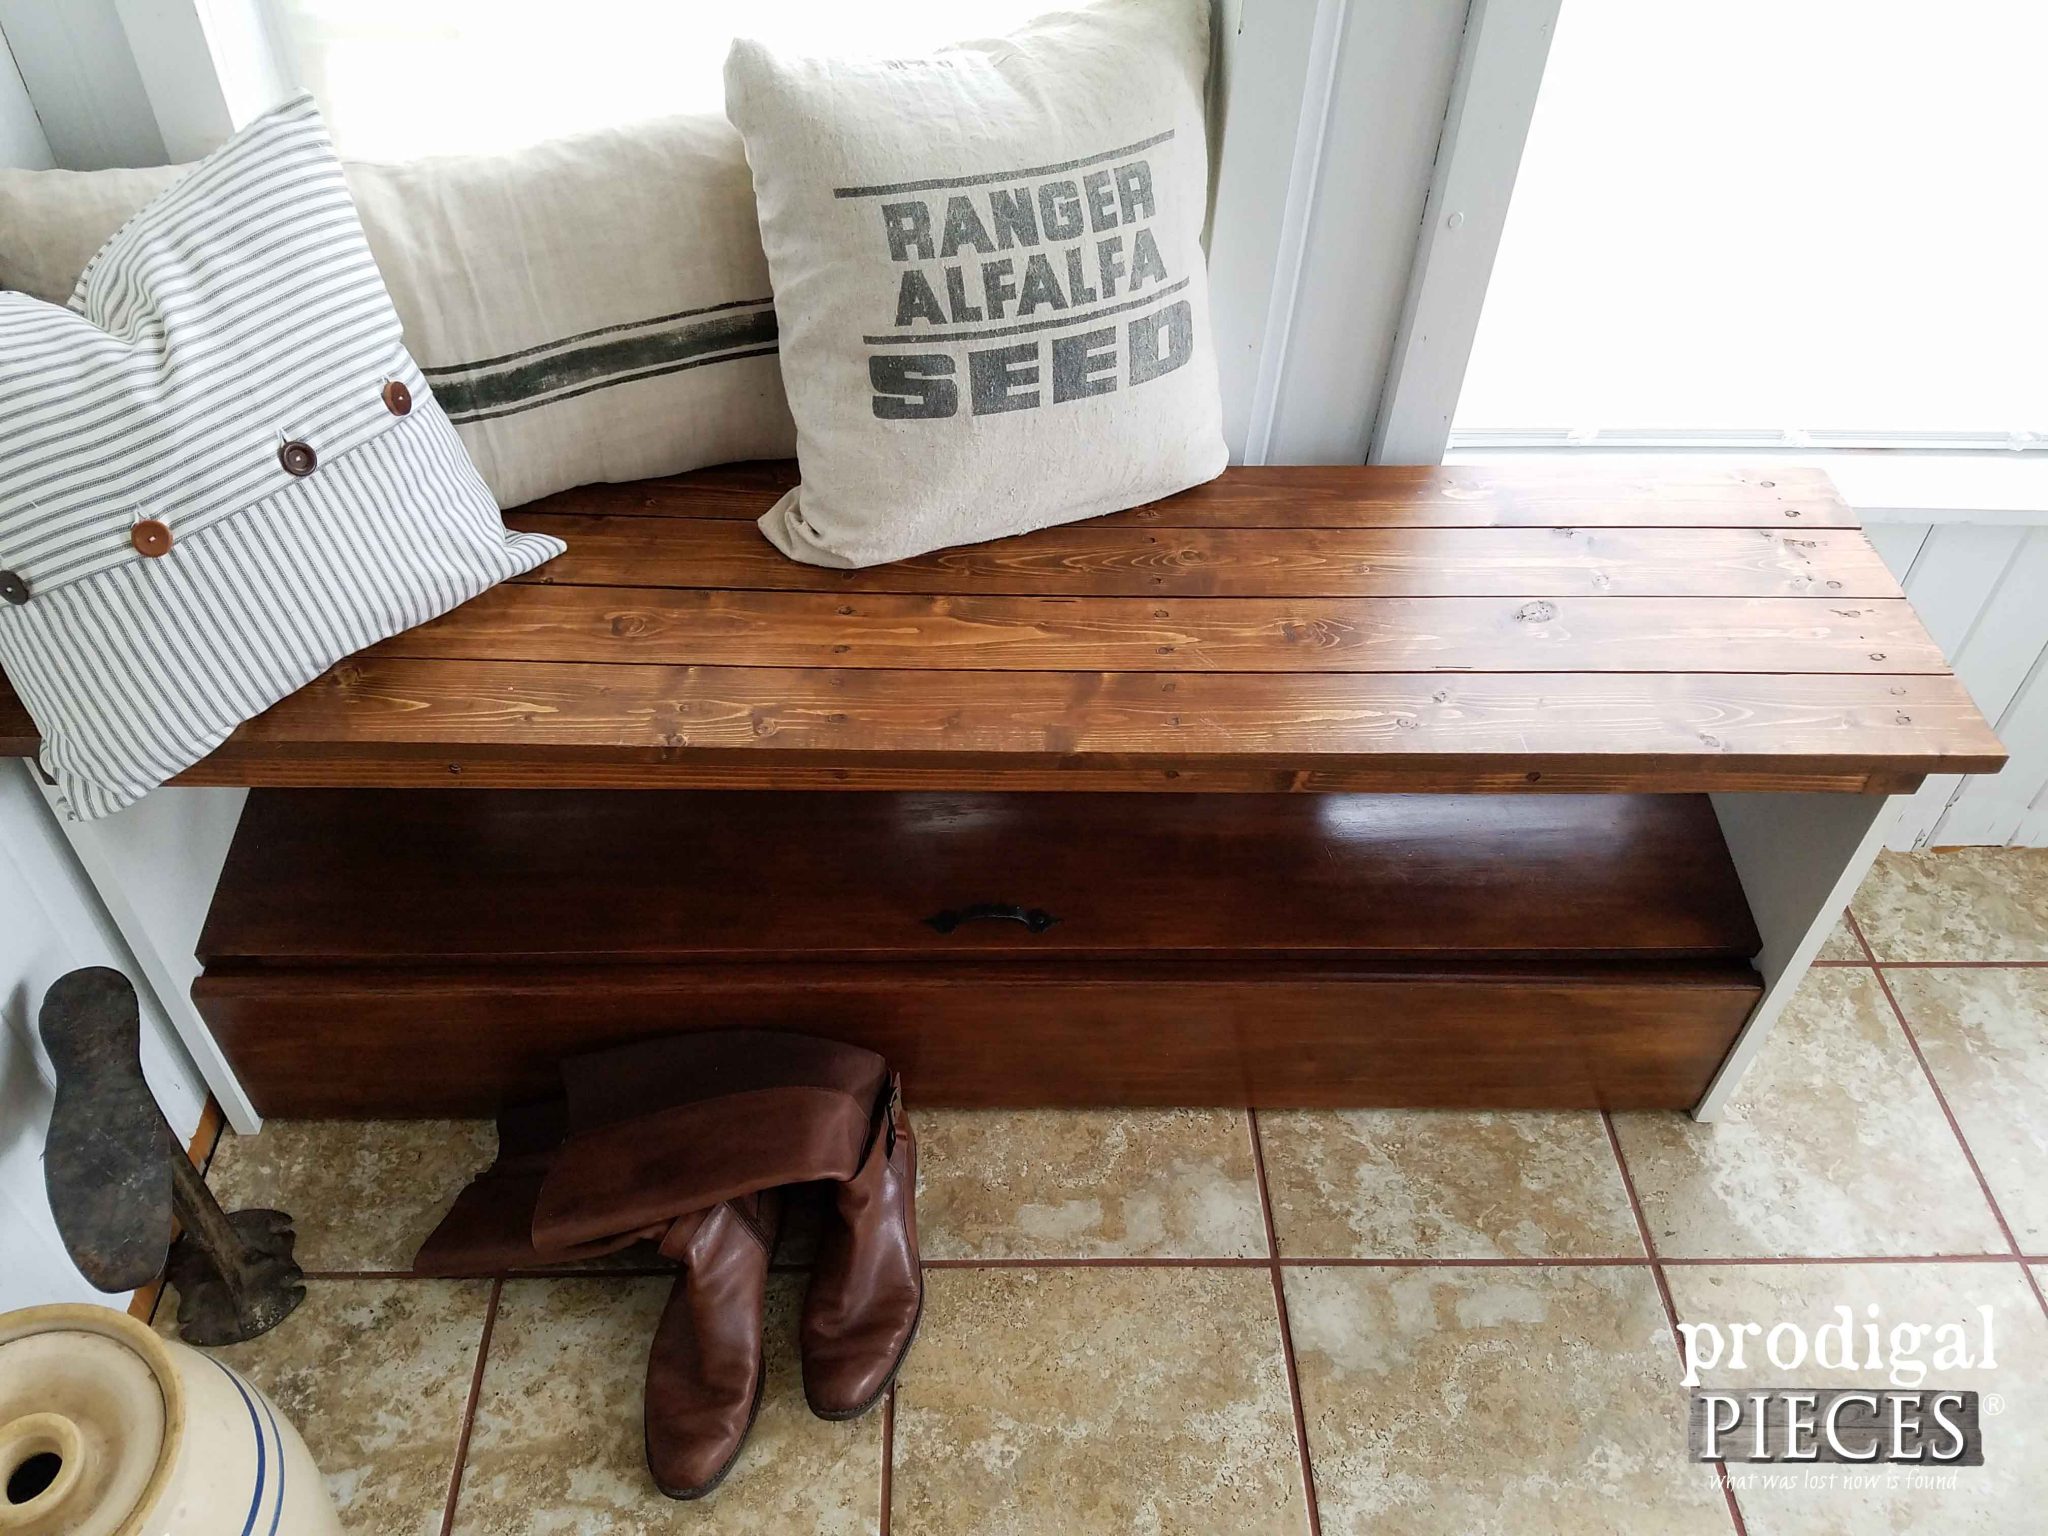 Upcycled Bookcase Headboard Bench with Storage by Prodigal Pieces | prodigalpieces.com